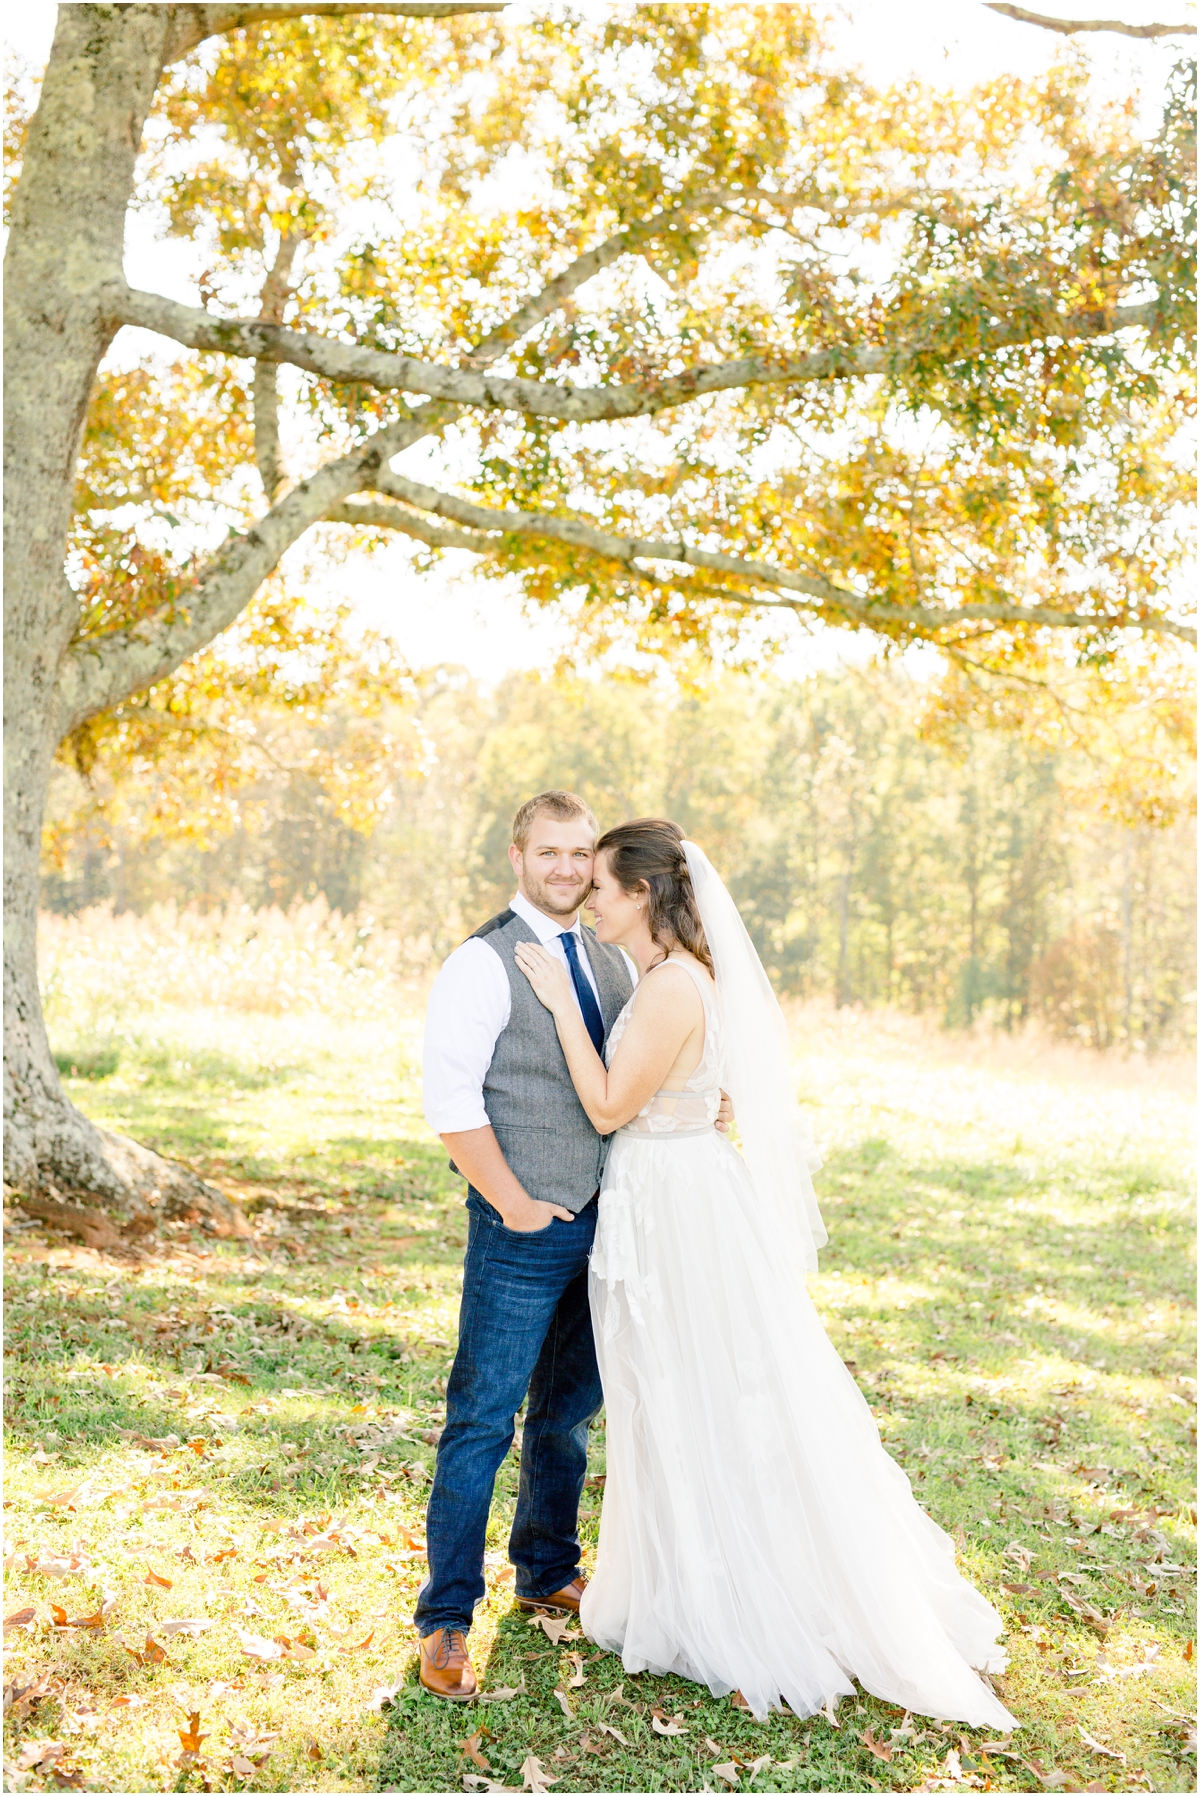 October fall wedding at Greenbrier Farms in Easley SC Greenville Wedding Photographer